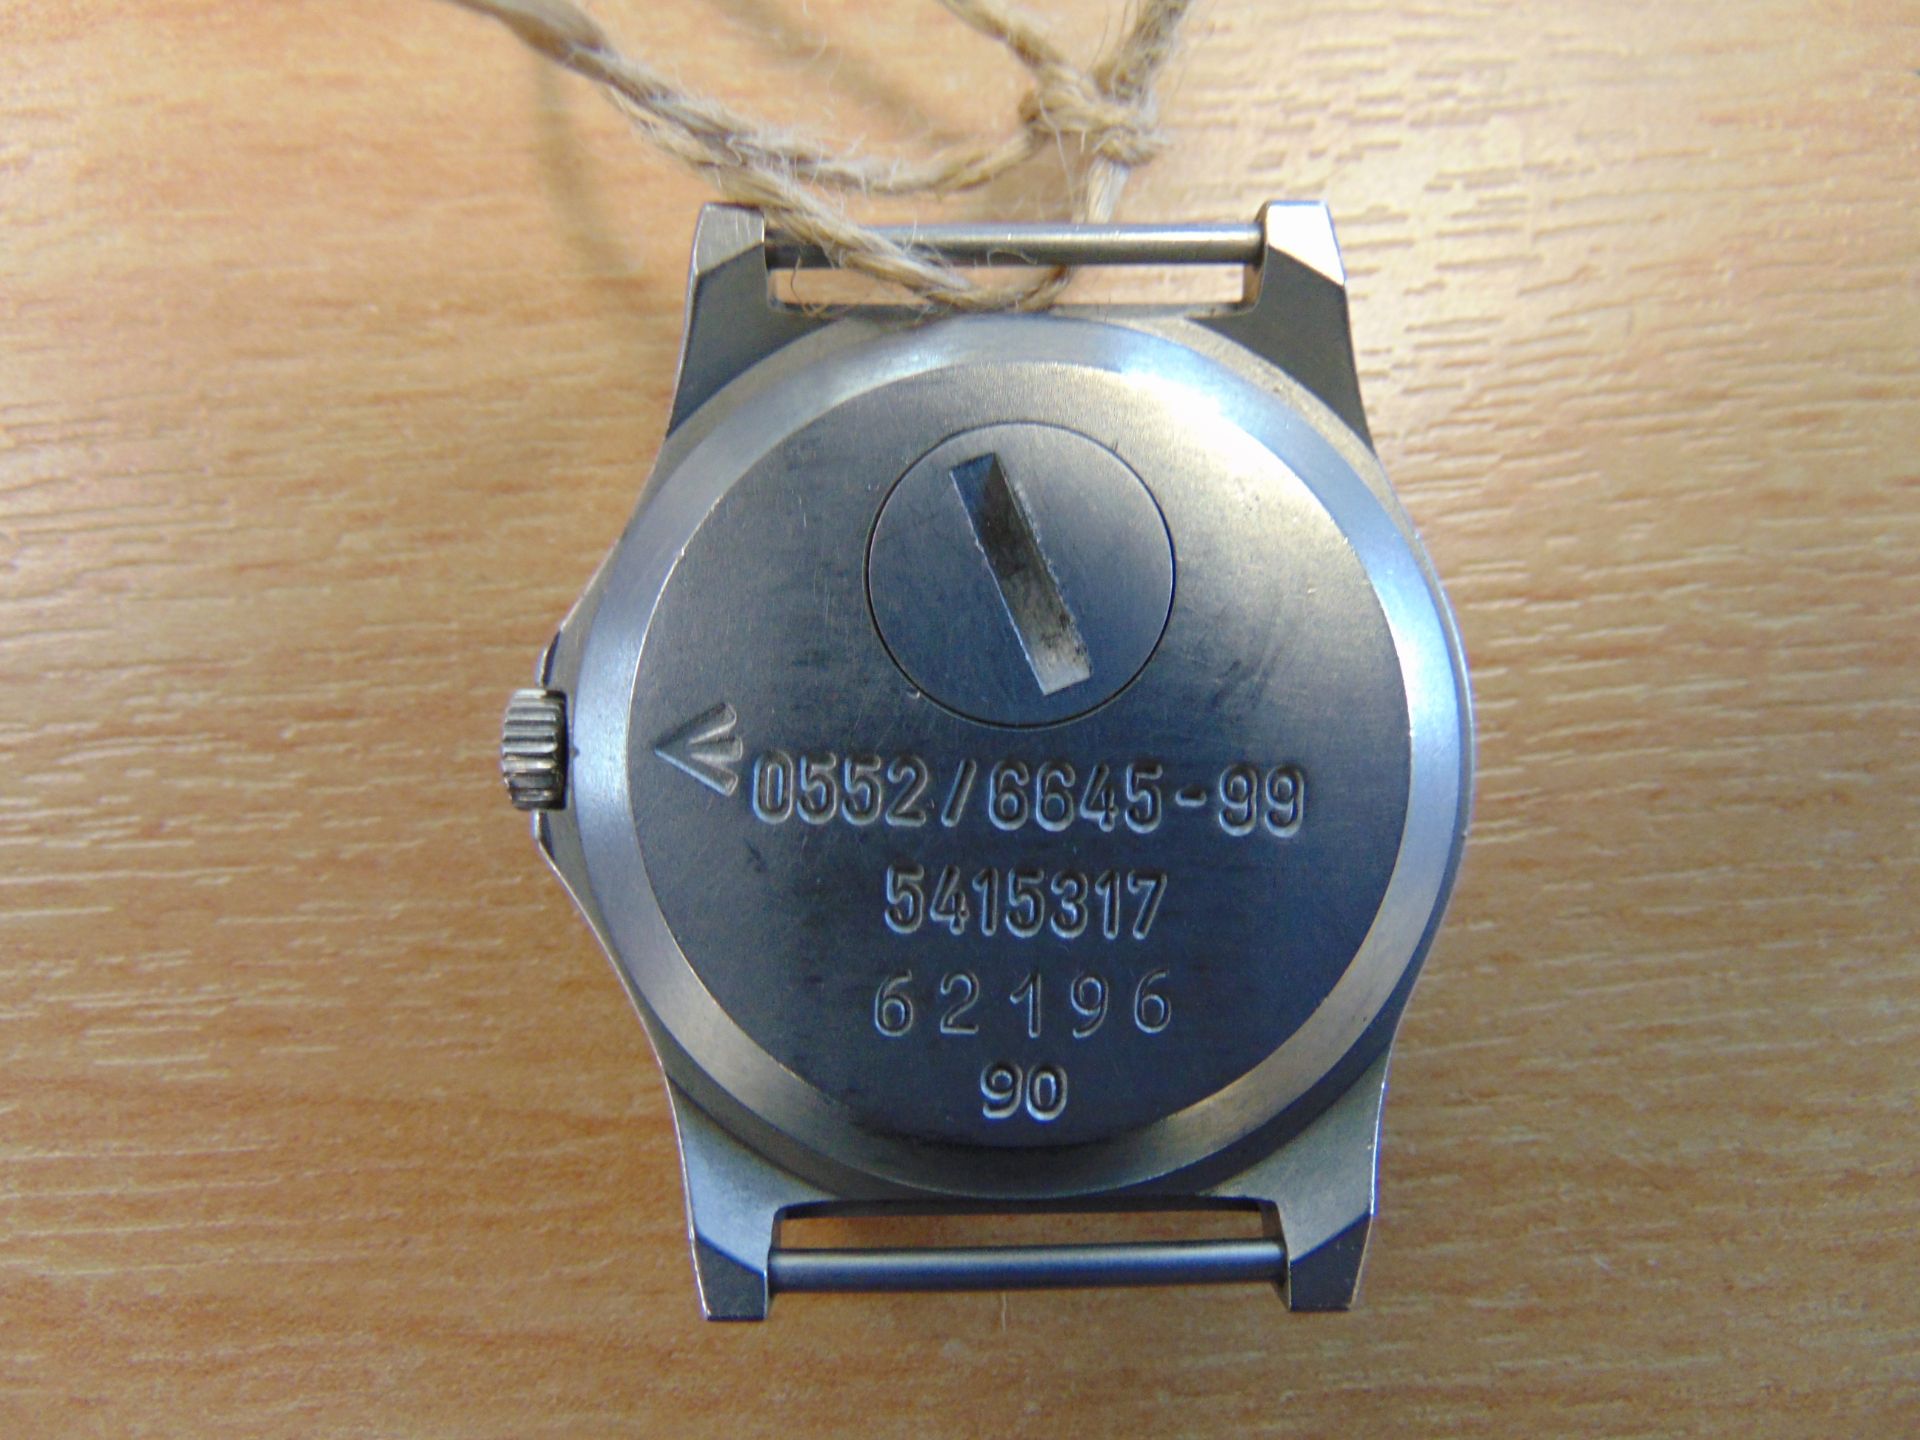 Rare CWC 0552 Royal Marines / Navy Issue Service Watch Nato Marks, Date 1990, * GULF WAR 1 * - Image 4 of 4